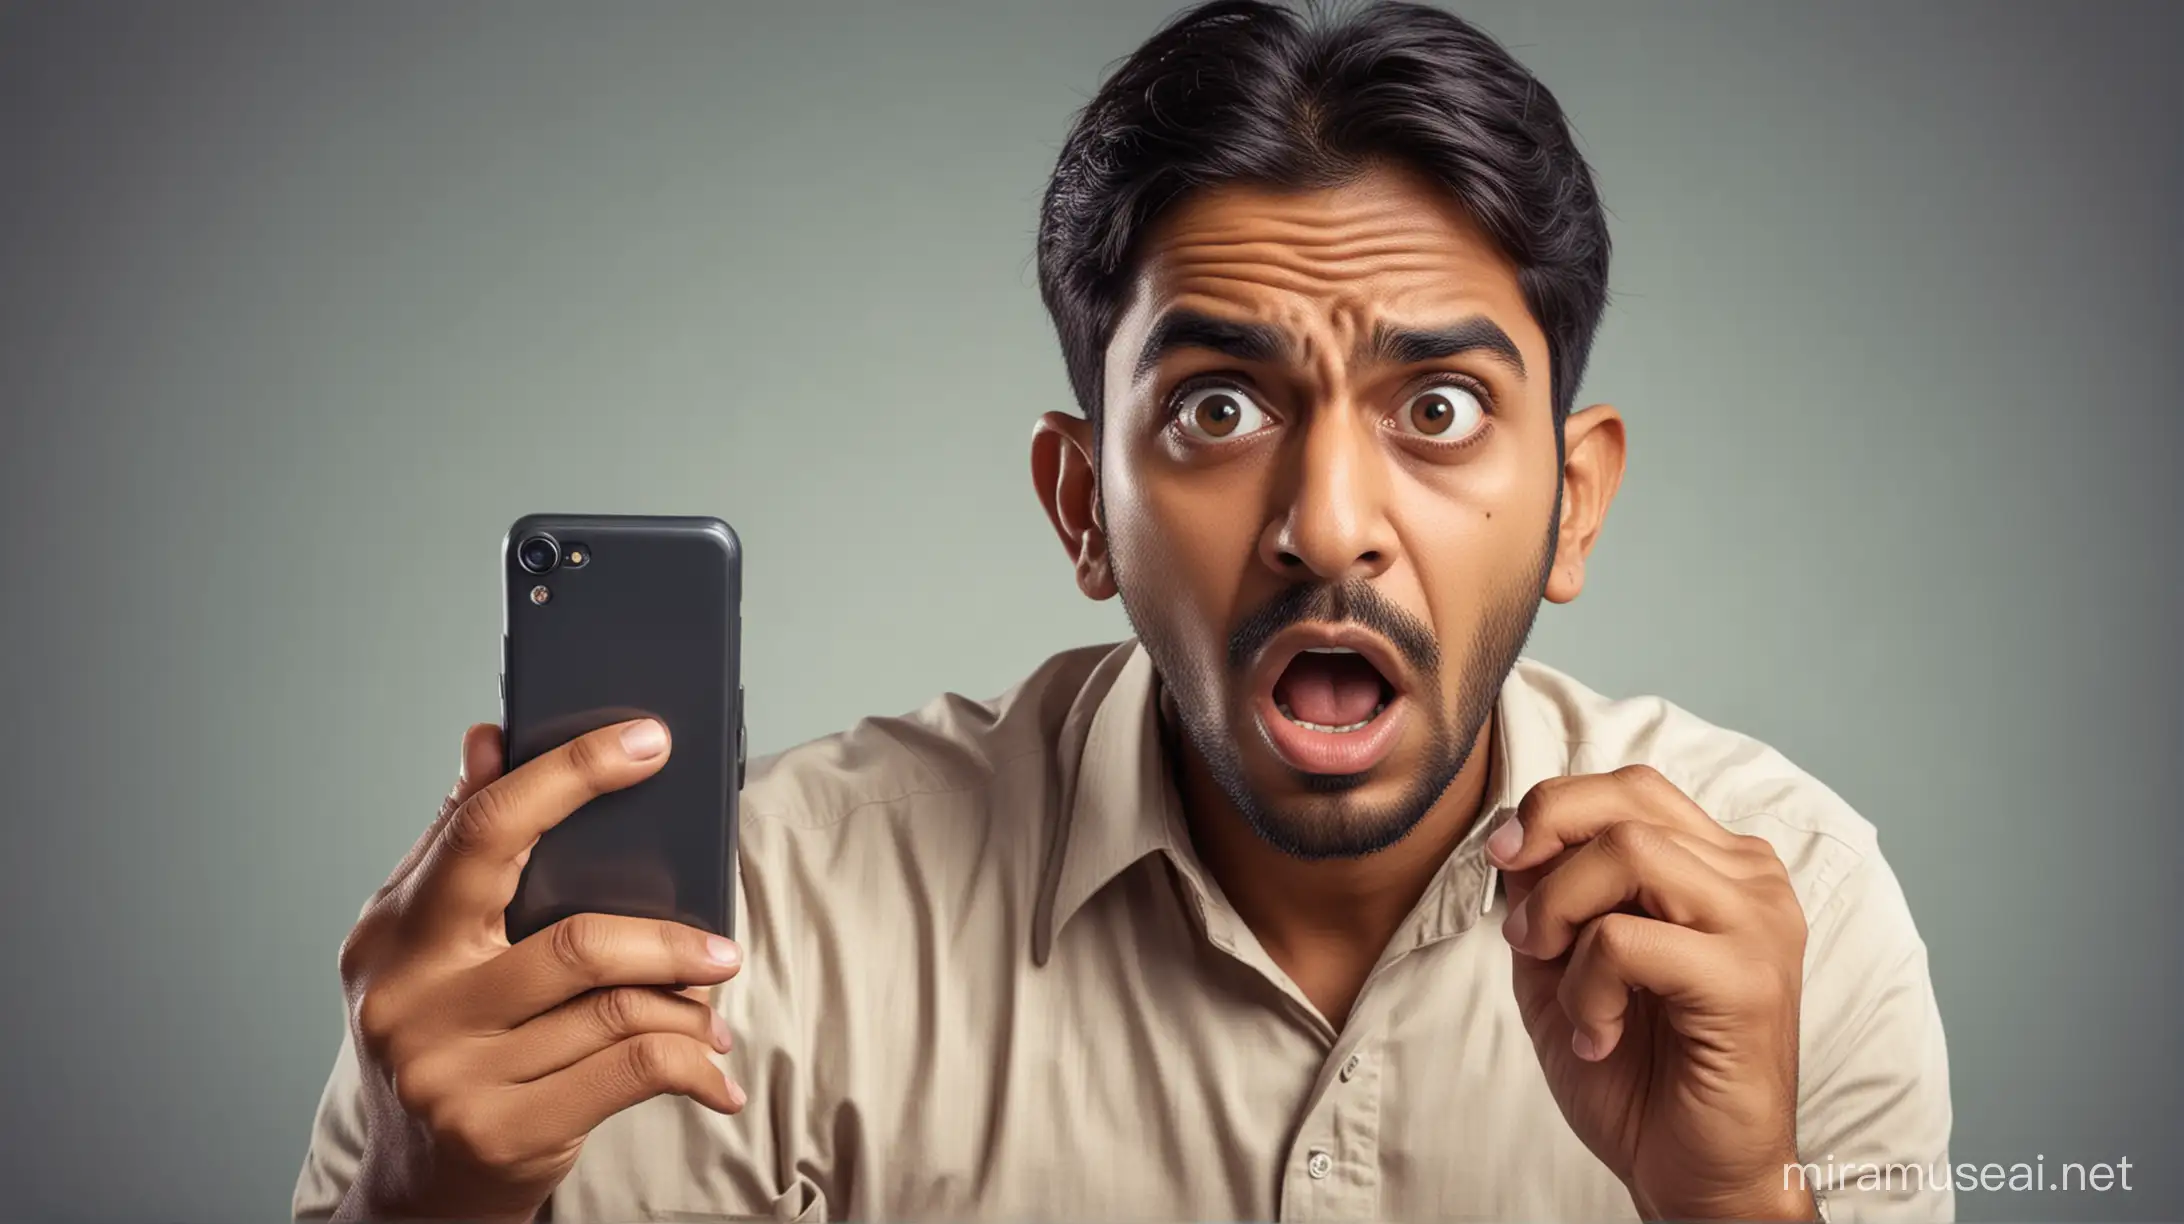 Create a realistic image of a indian man looking at a phone, shocked, Capture the tension and concern on the person's face, highlighting the seriousness of online fraud. Use detailed imagery to convey the dangers of online scams